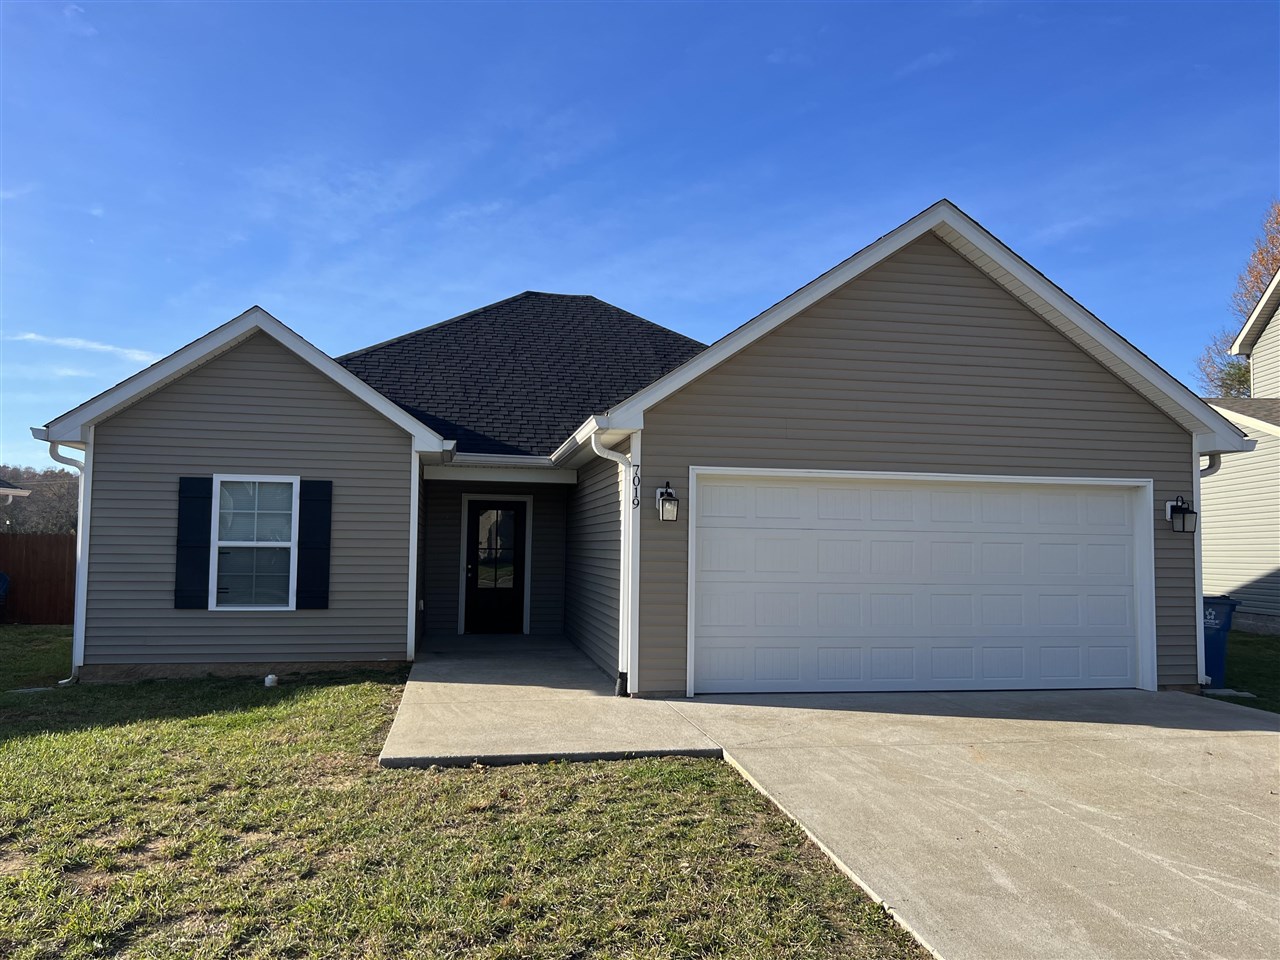 7019 Stone Meade Court, Bowling Green, KY 42101